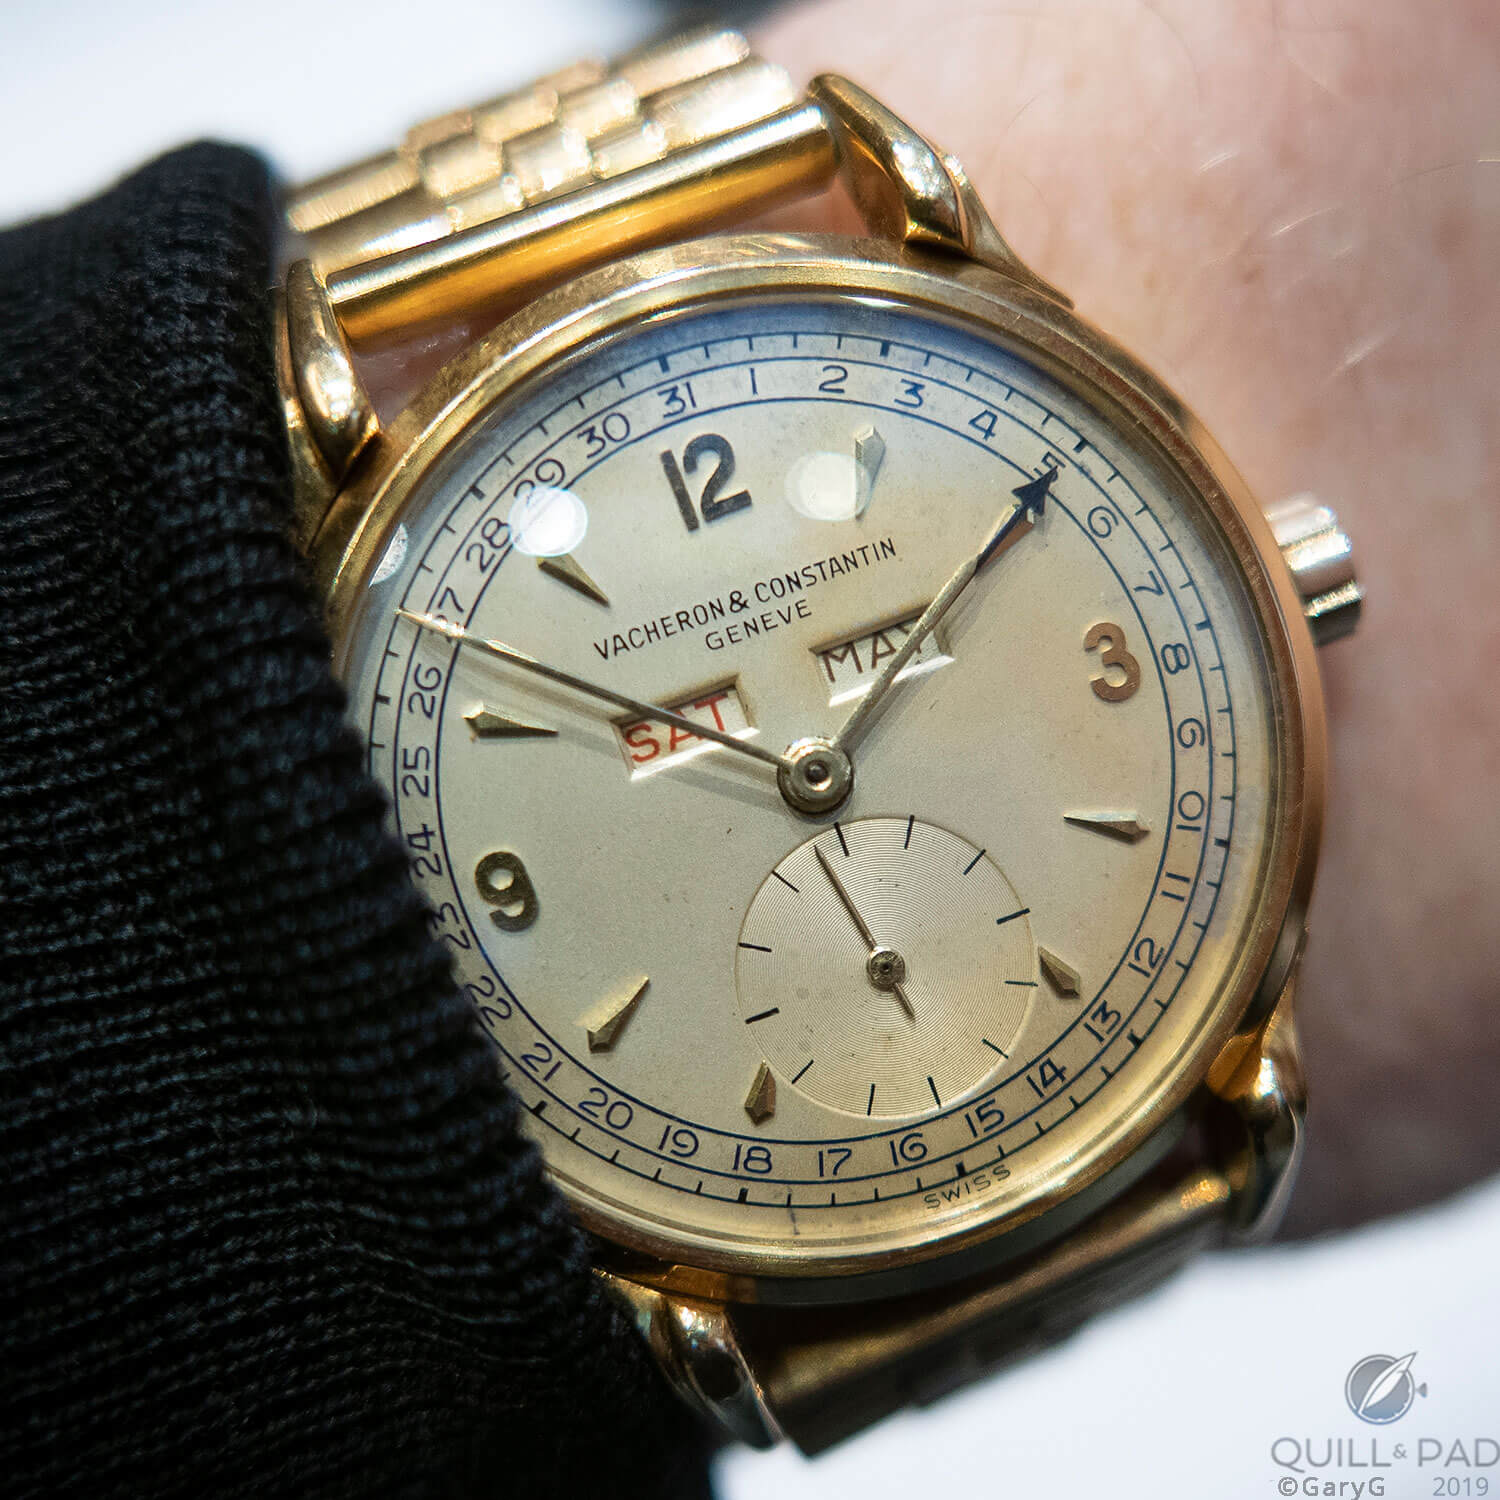 You are there: Vacheron Constantin Reference 4560 on the author’s wrist at Sotheby’s, Geneva